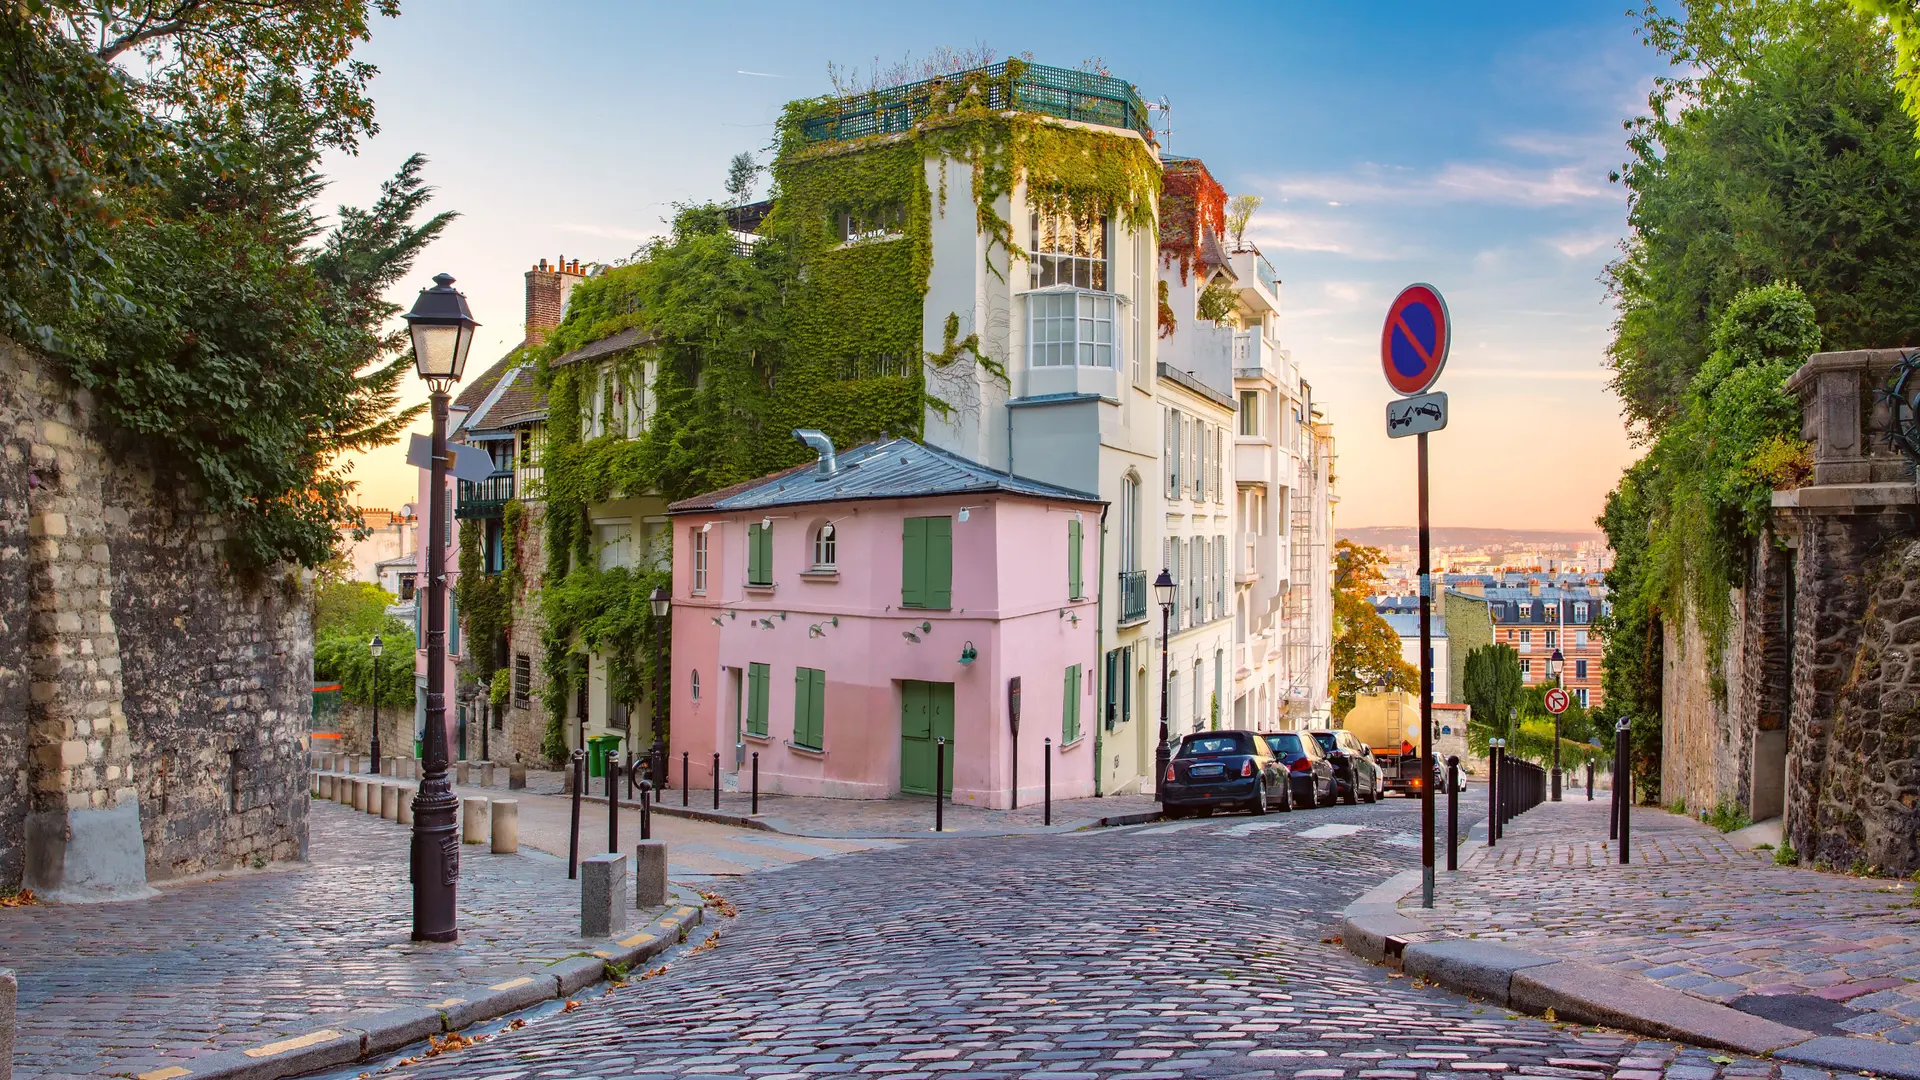 Lane in Paris with stone streets, pinkj and white building with green nature overtaken parts of it.